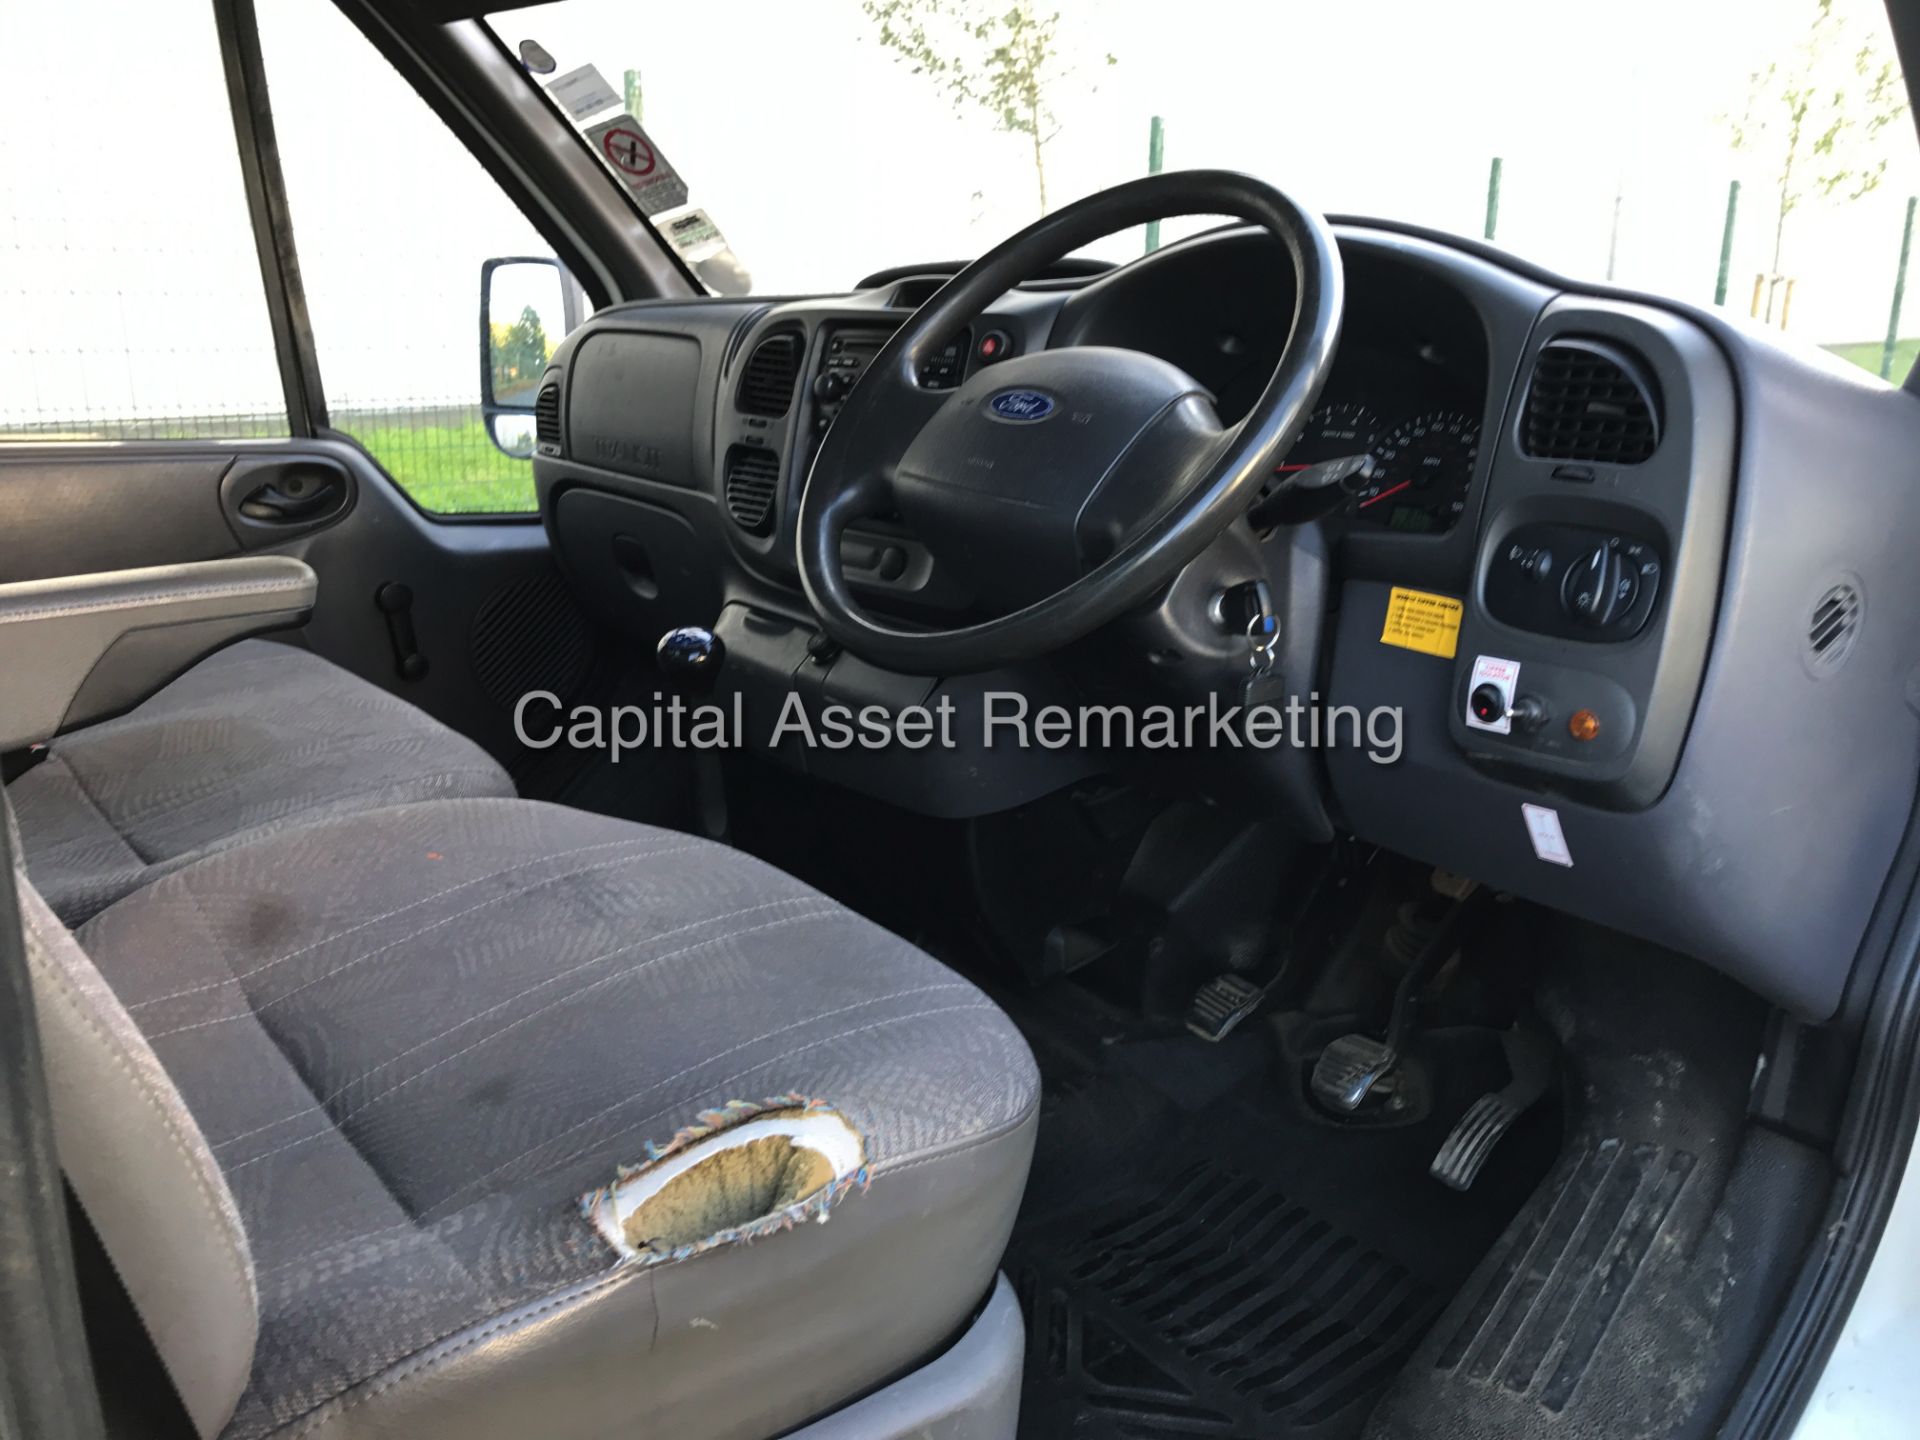 ON SALE FORD TRANSIT 2.4TDCI "TWIN WHEEL TIPPER" (2006 YEAR)ONLY 89K MILES GENUINE -VERY SOLID BODY - Image 11 of 15